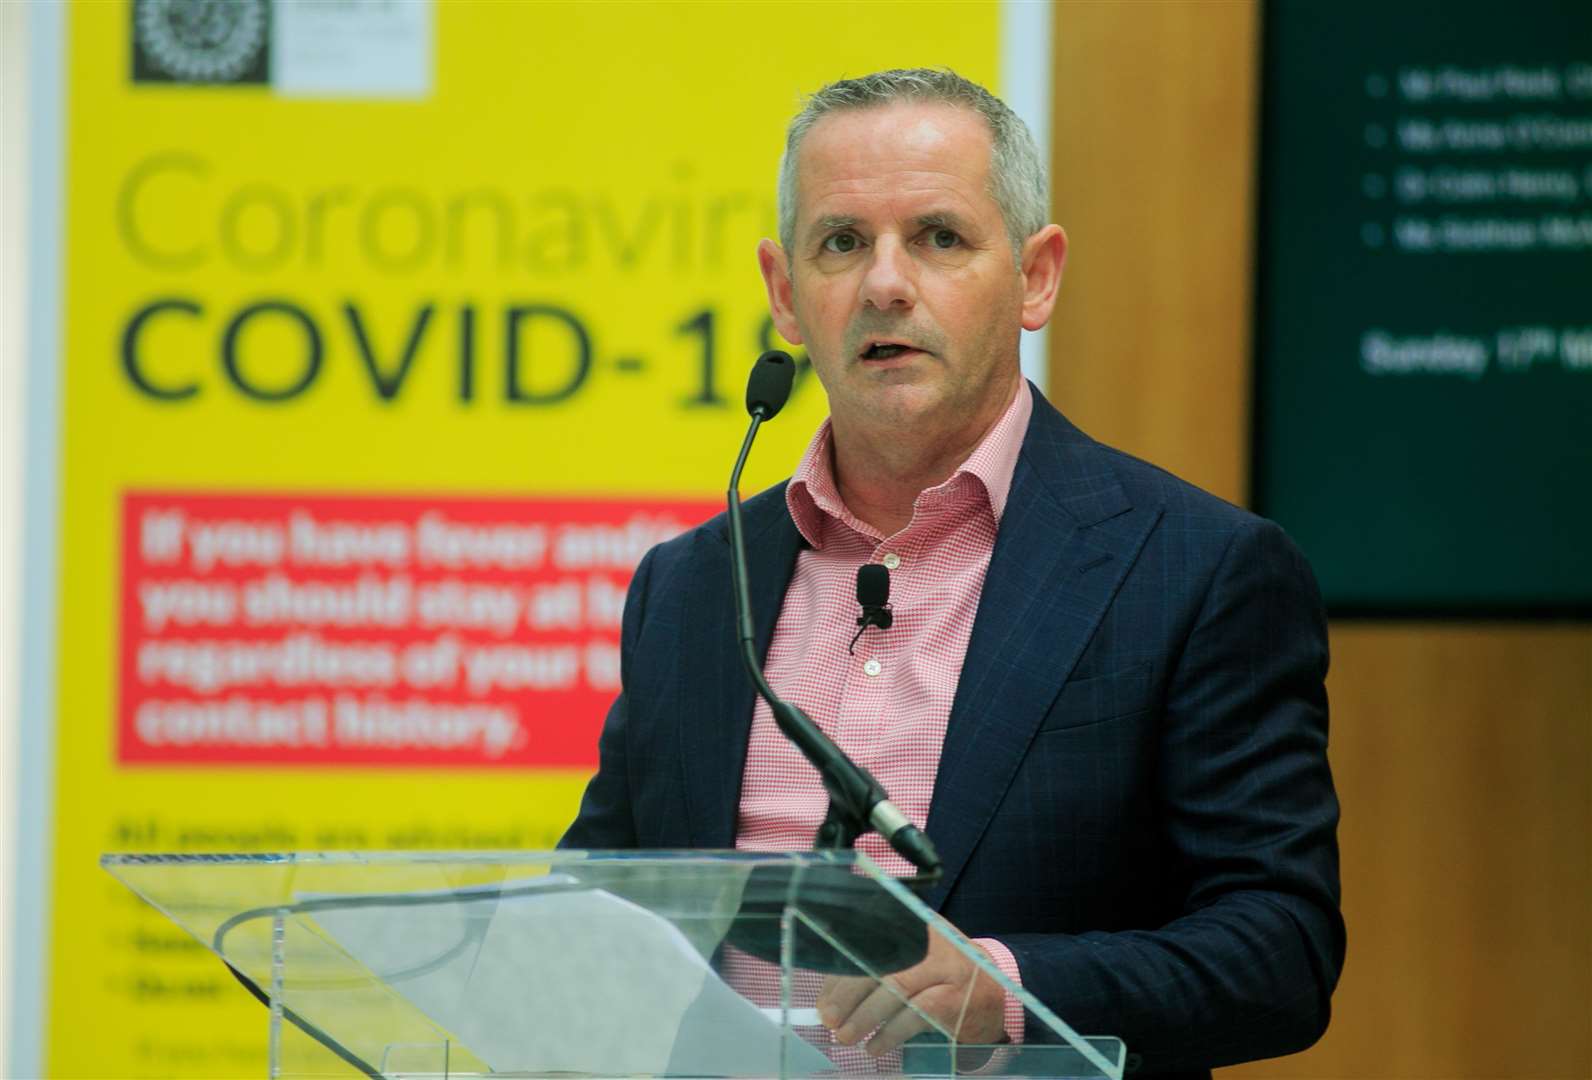 HSE chief executive Paul Reid has said resuming non-Covid services will be an unpredictable process (Photocall Ireland/PA)